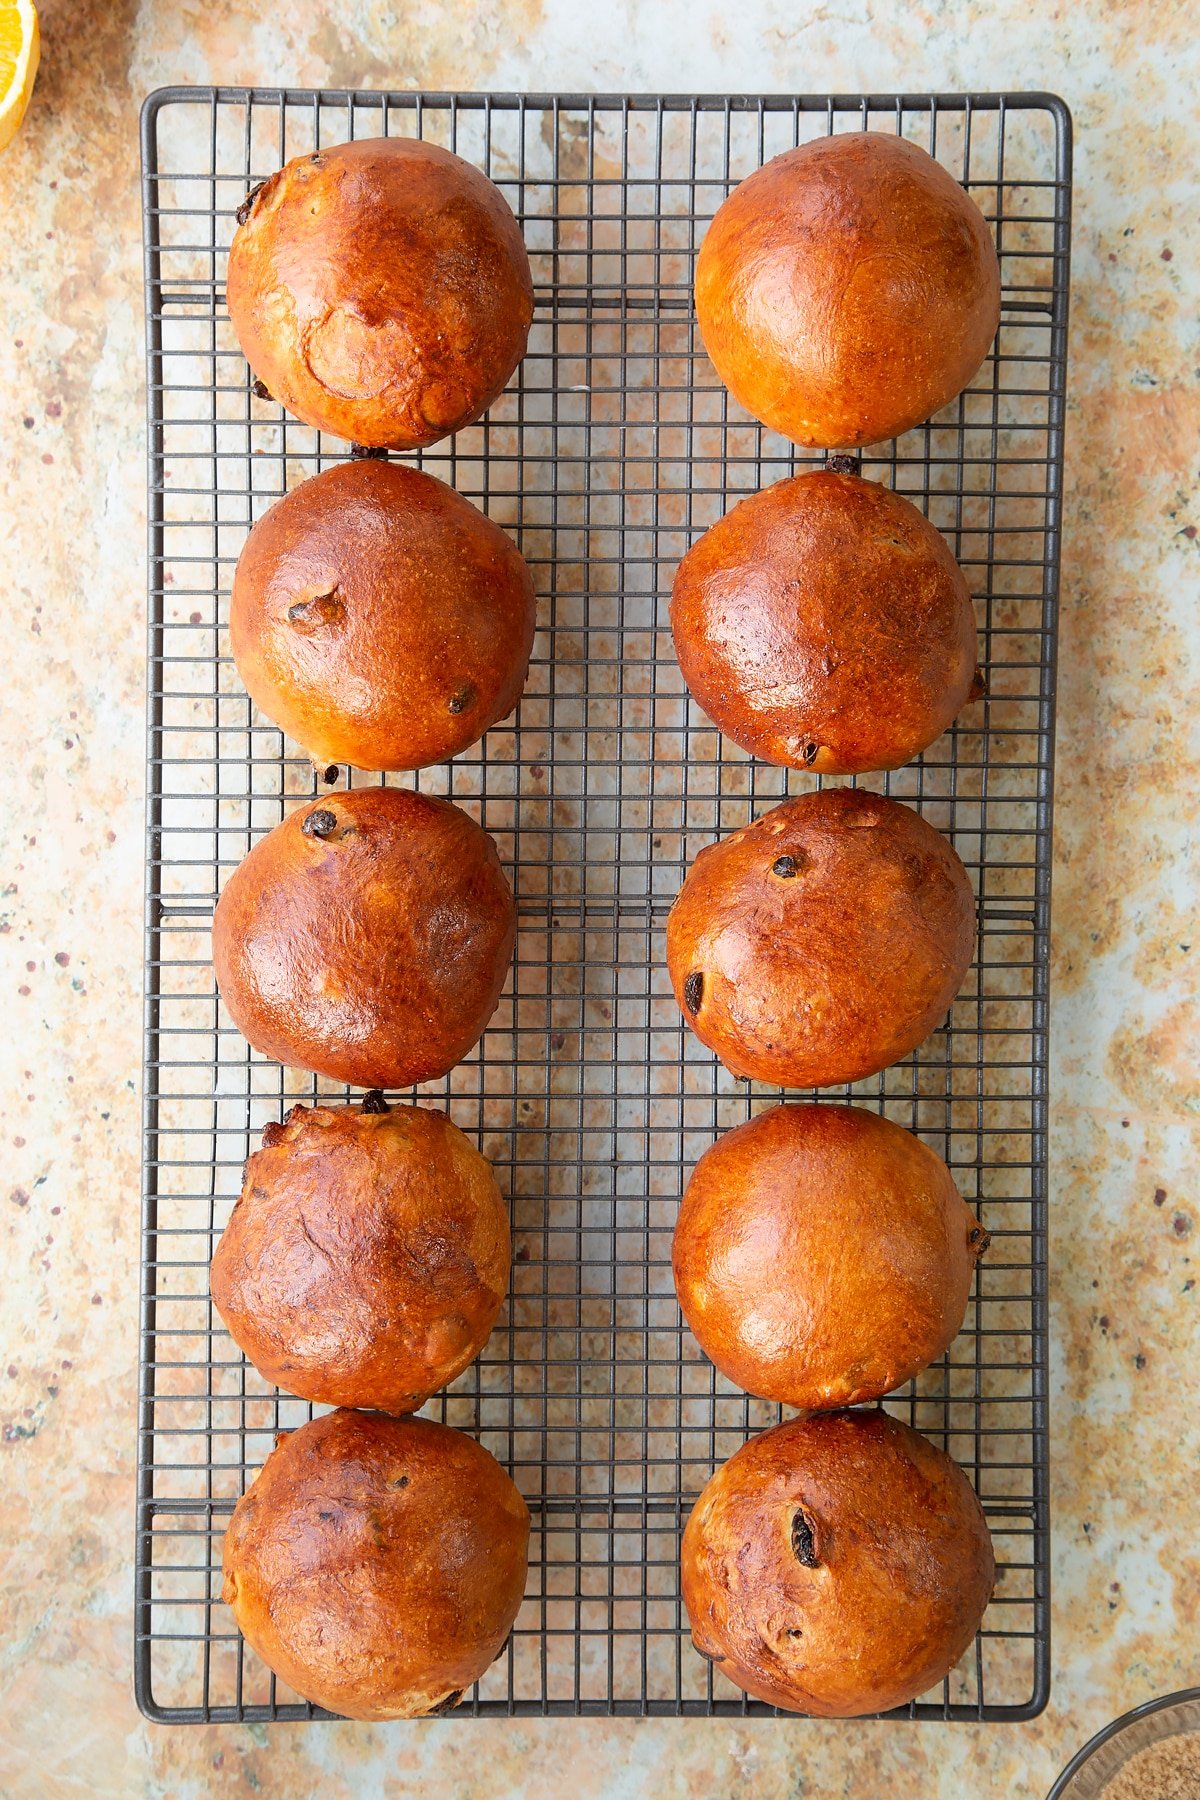 Overhead shot of the spiced fruit buns cooling on the cooling rack.